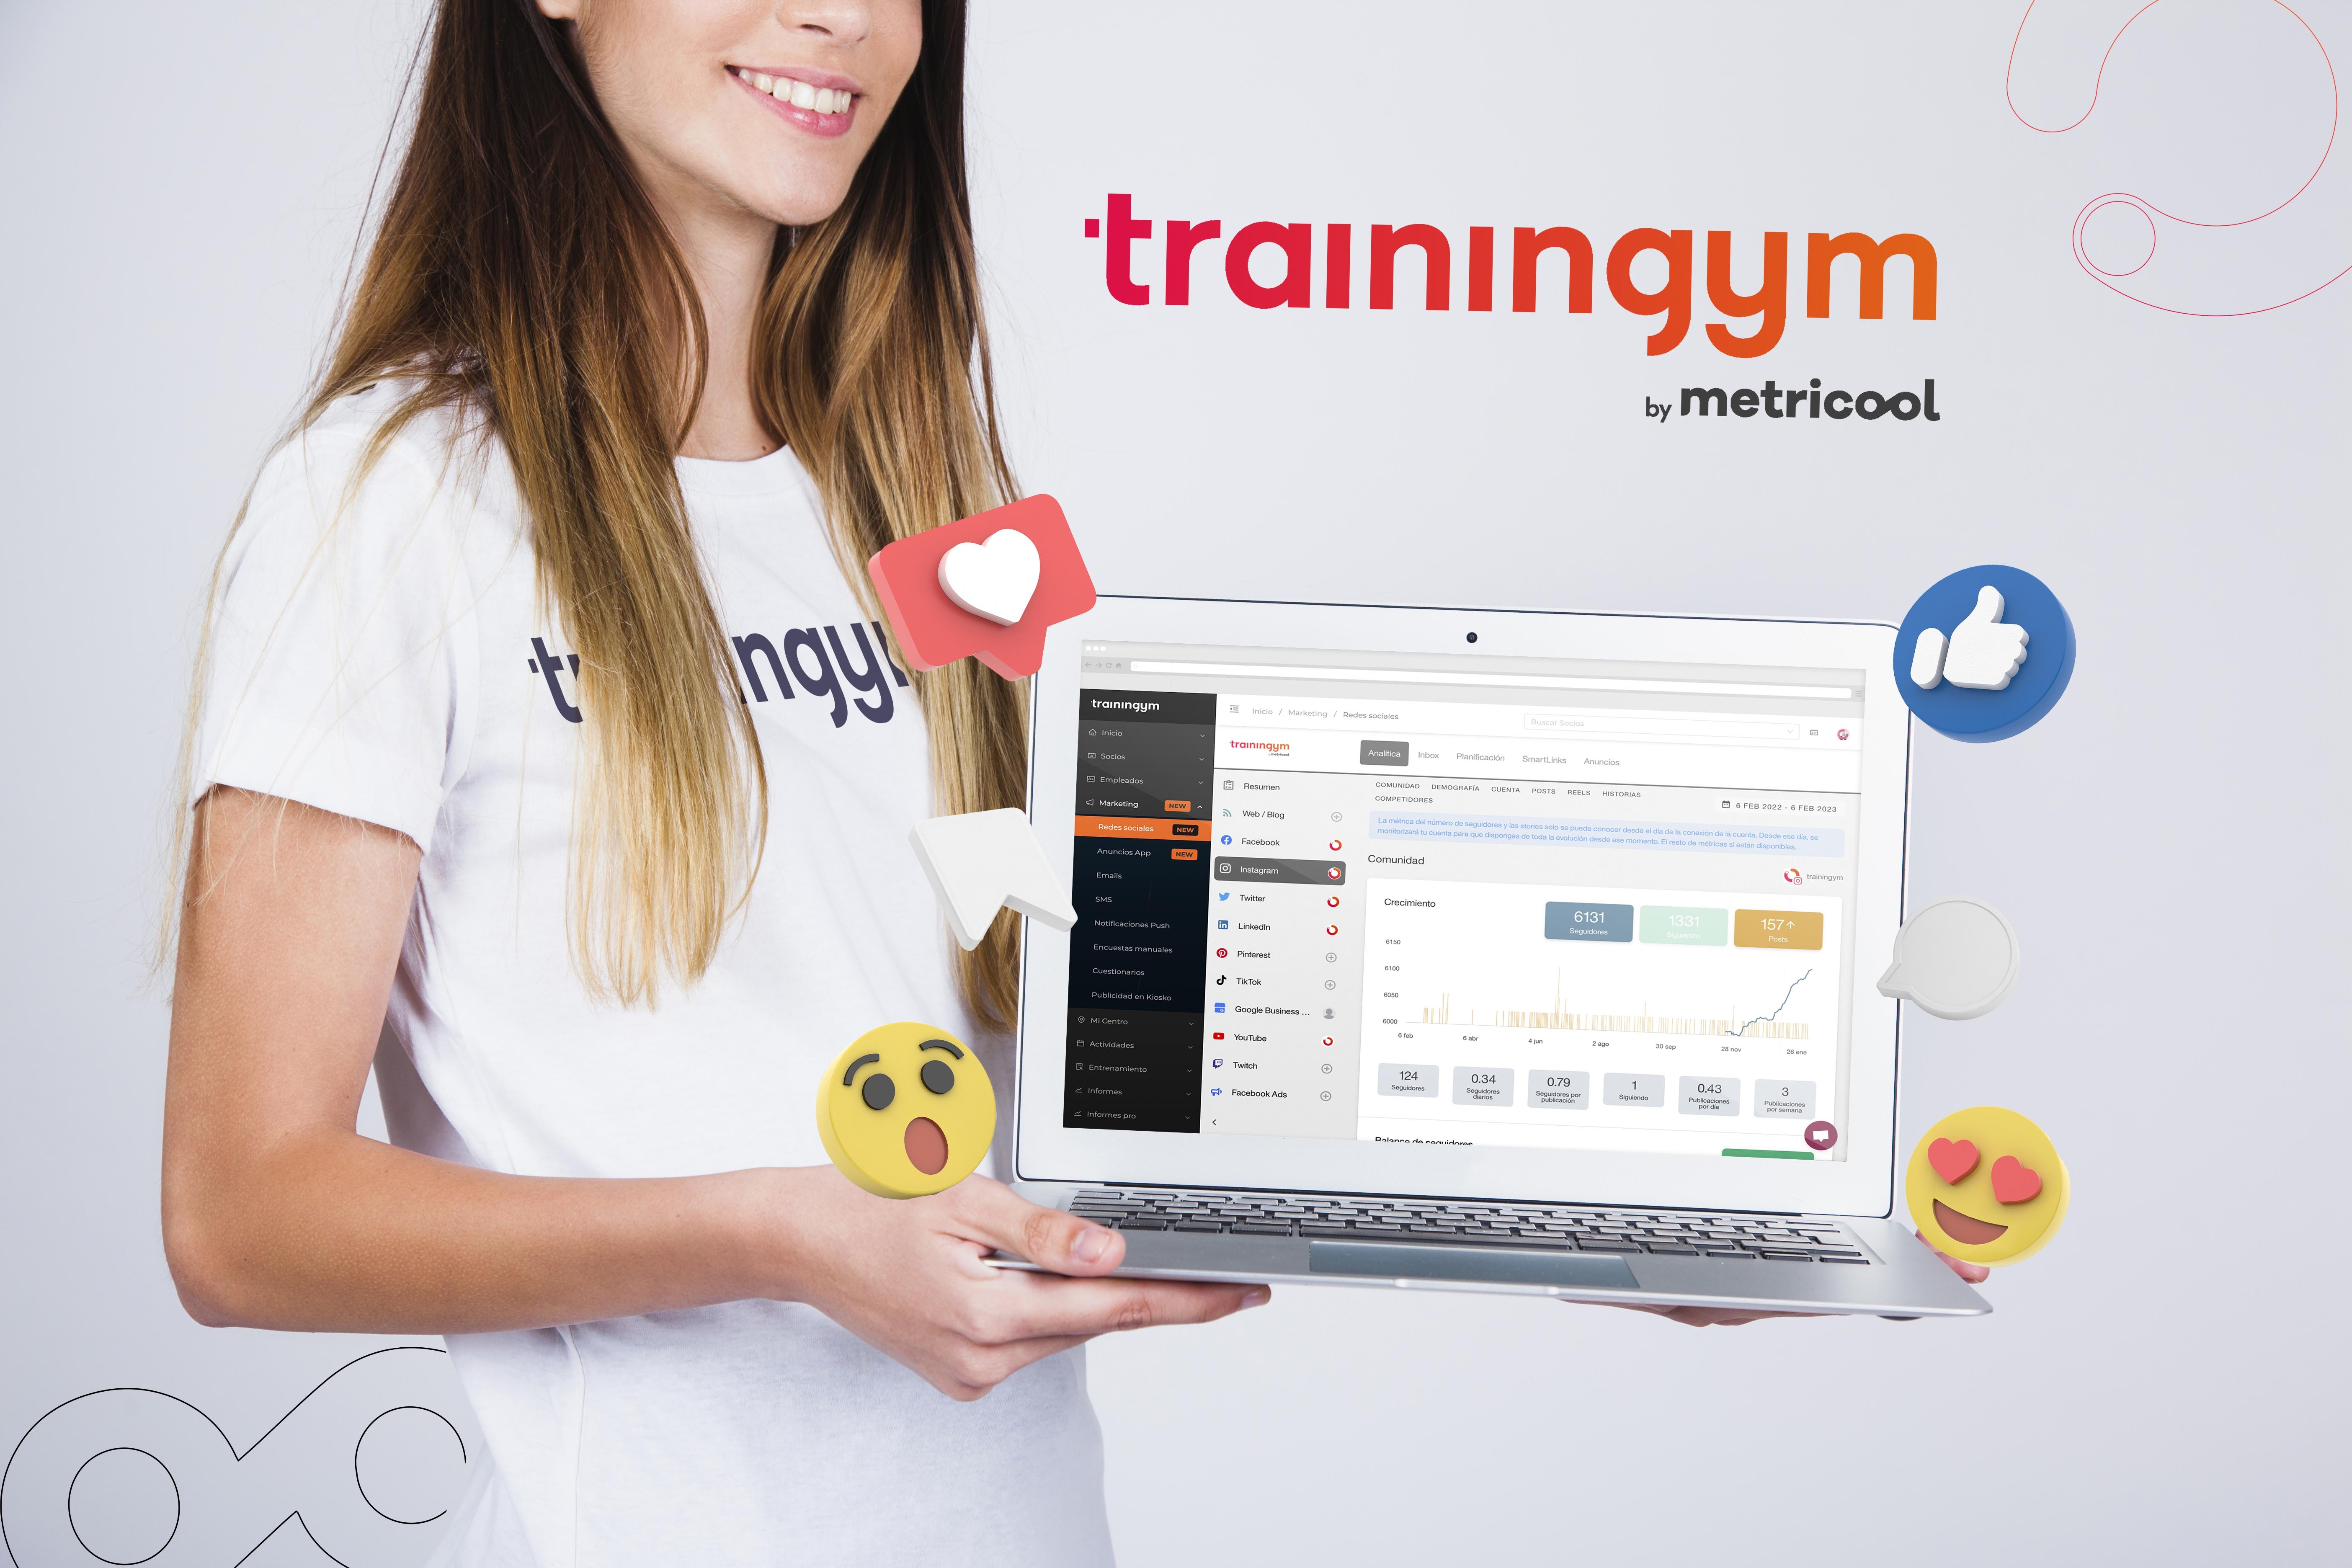 Trainingym now includes Metricool in all licenses